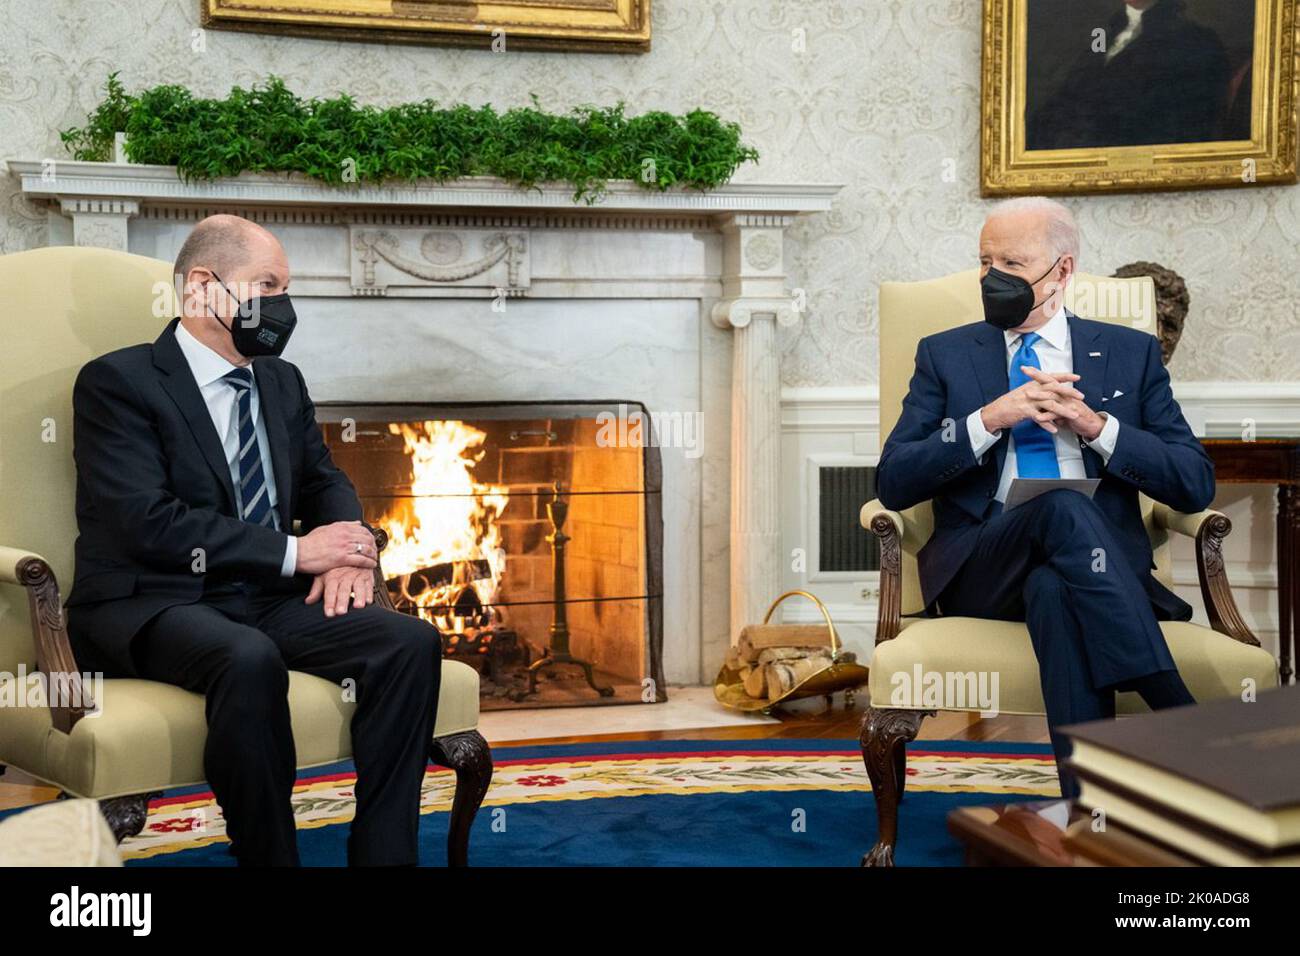 U.S. President Joe Biden welcomes Chancellor Olaf Scholz of Germany to the White House, February, 2022 Stock Photo